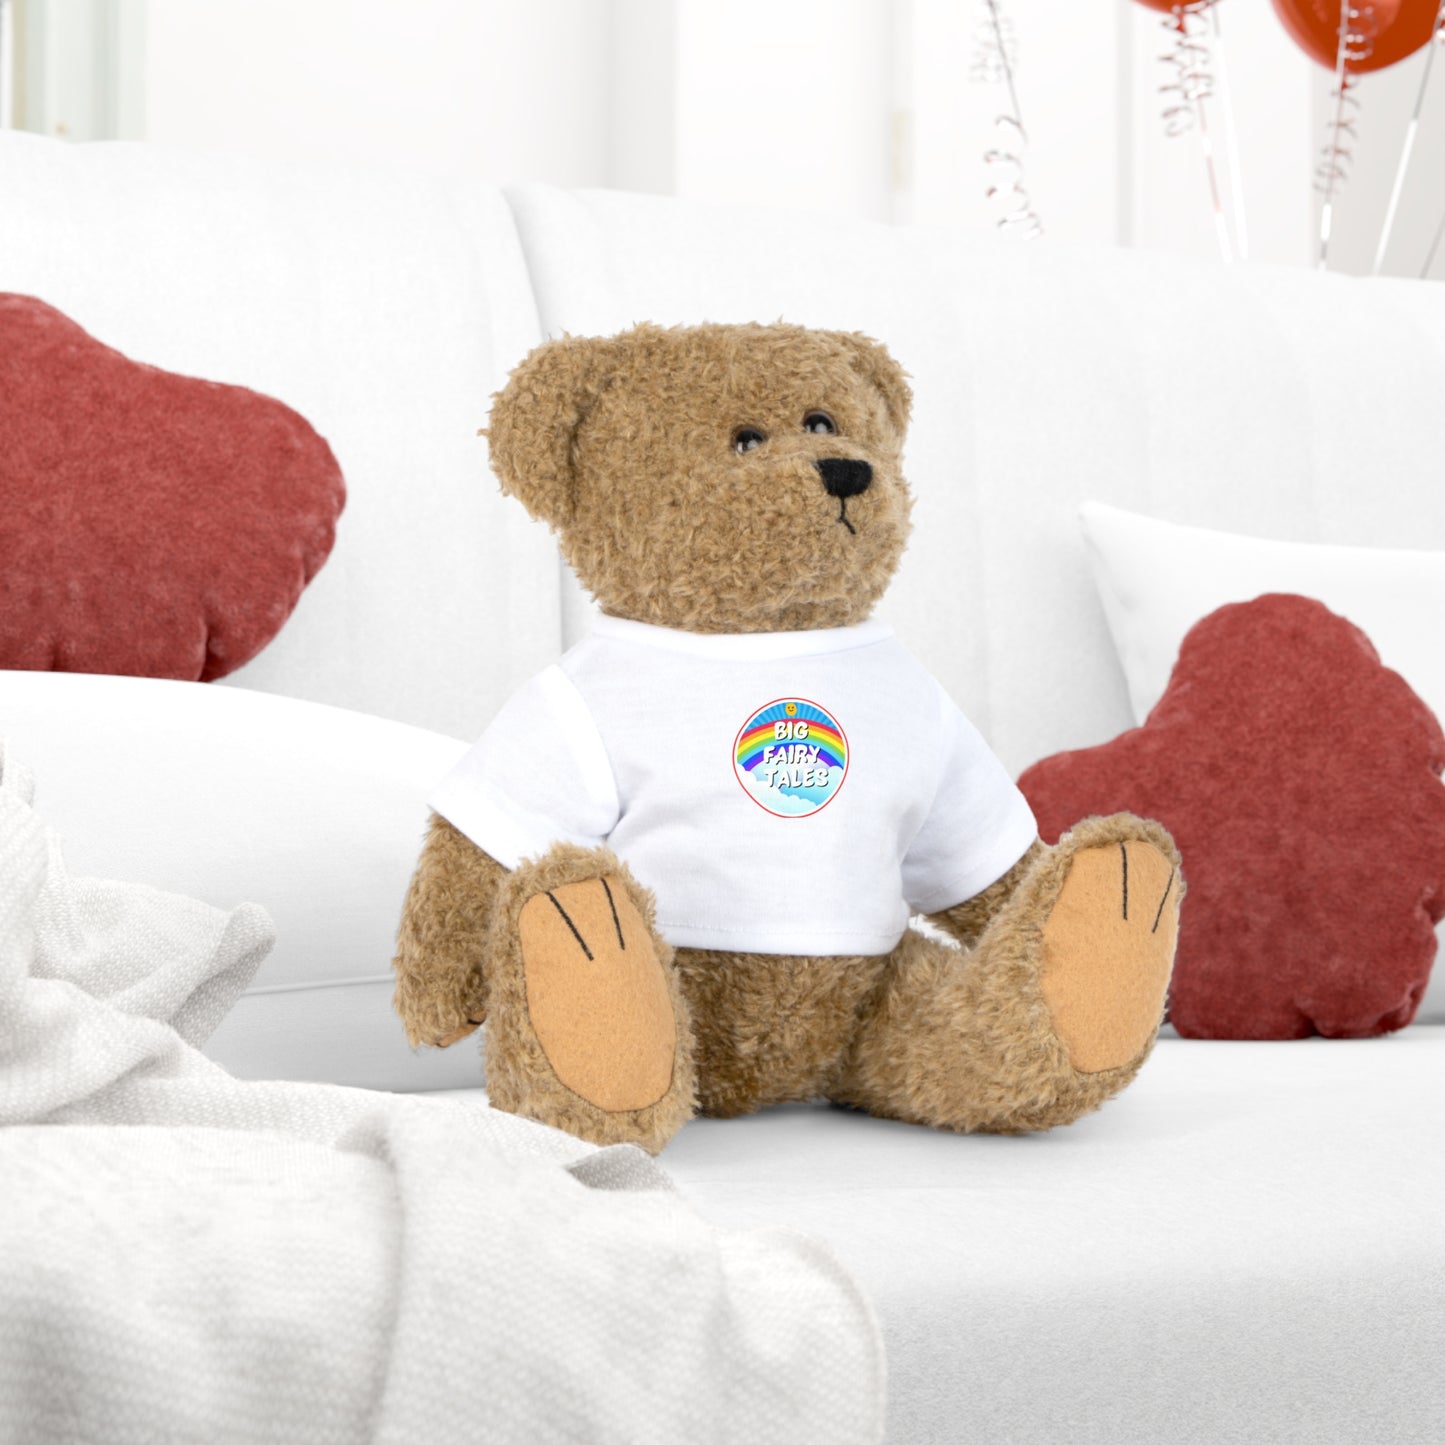 Big Fairy Tales By Schatar Plush Stuffed Animal With T-Shirt